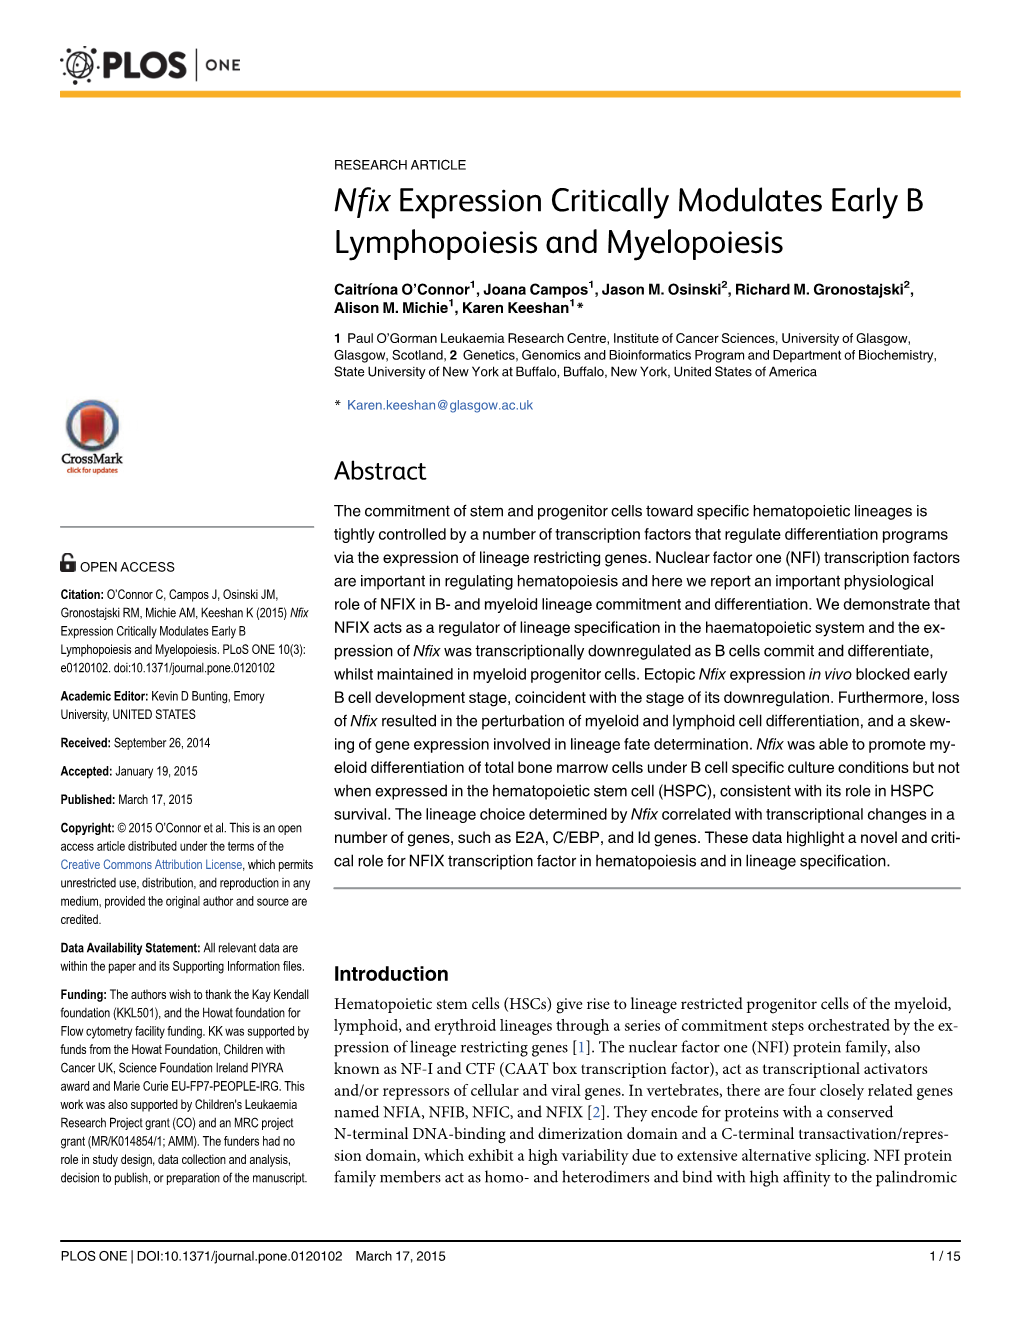 Nfix Expression Critically Modulates Early B Lymphopoiesis and Myelopoiesis